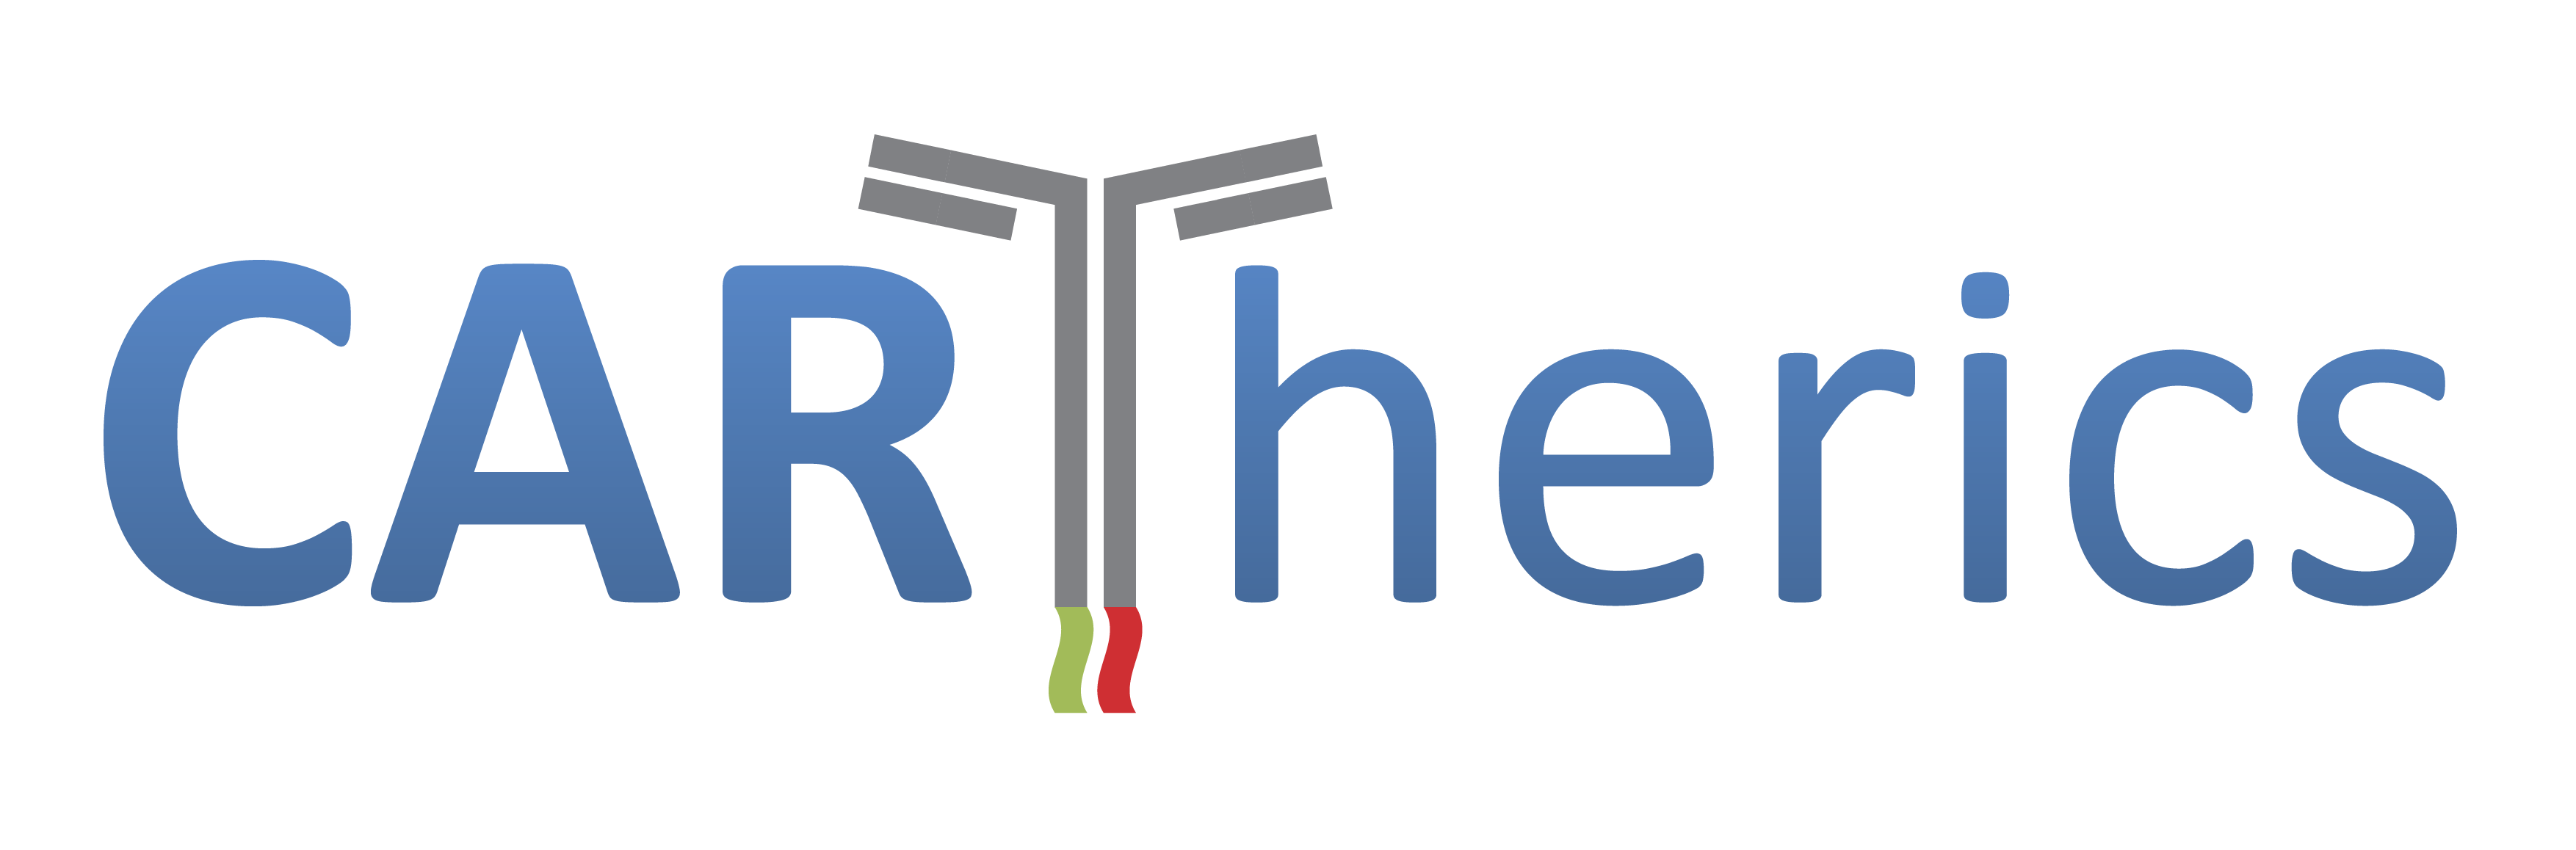 Cartherics – The future of cancer treatment : off-the-shelf cellular immunotherapy for cancer. Logo